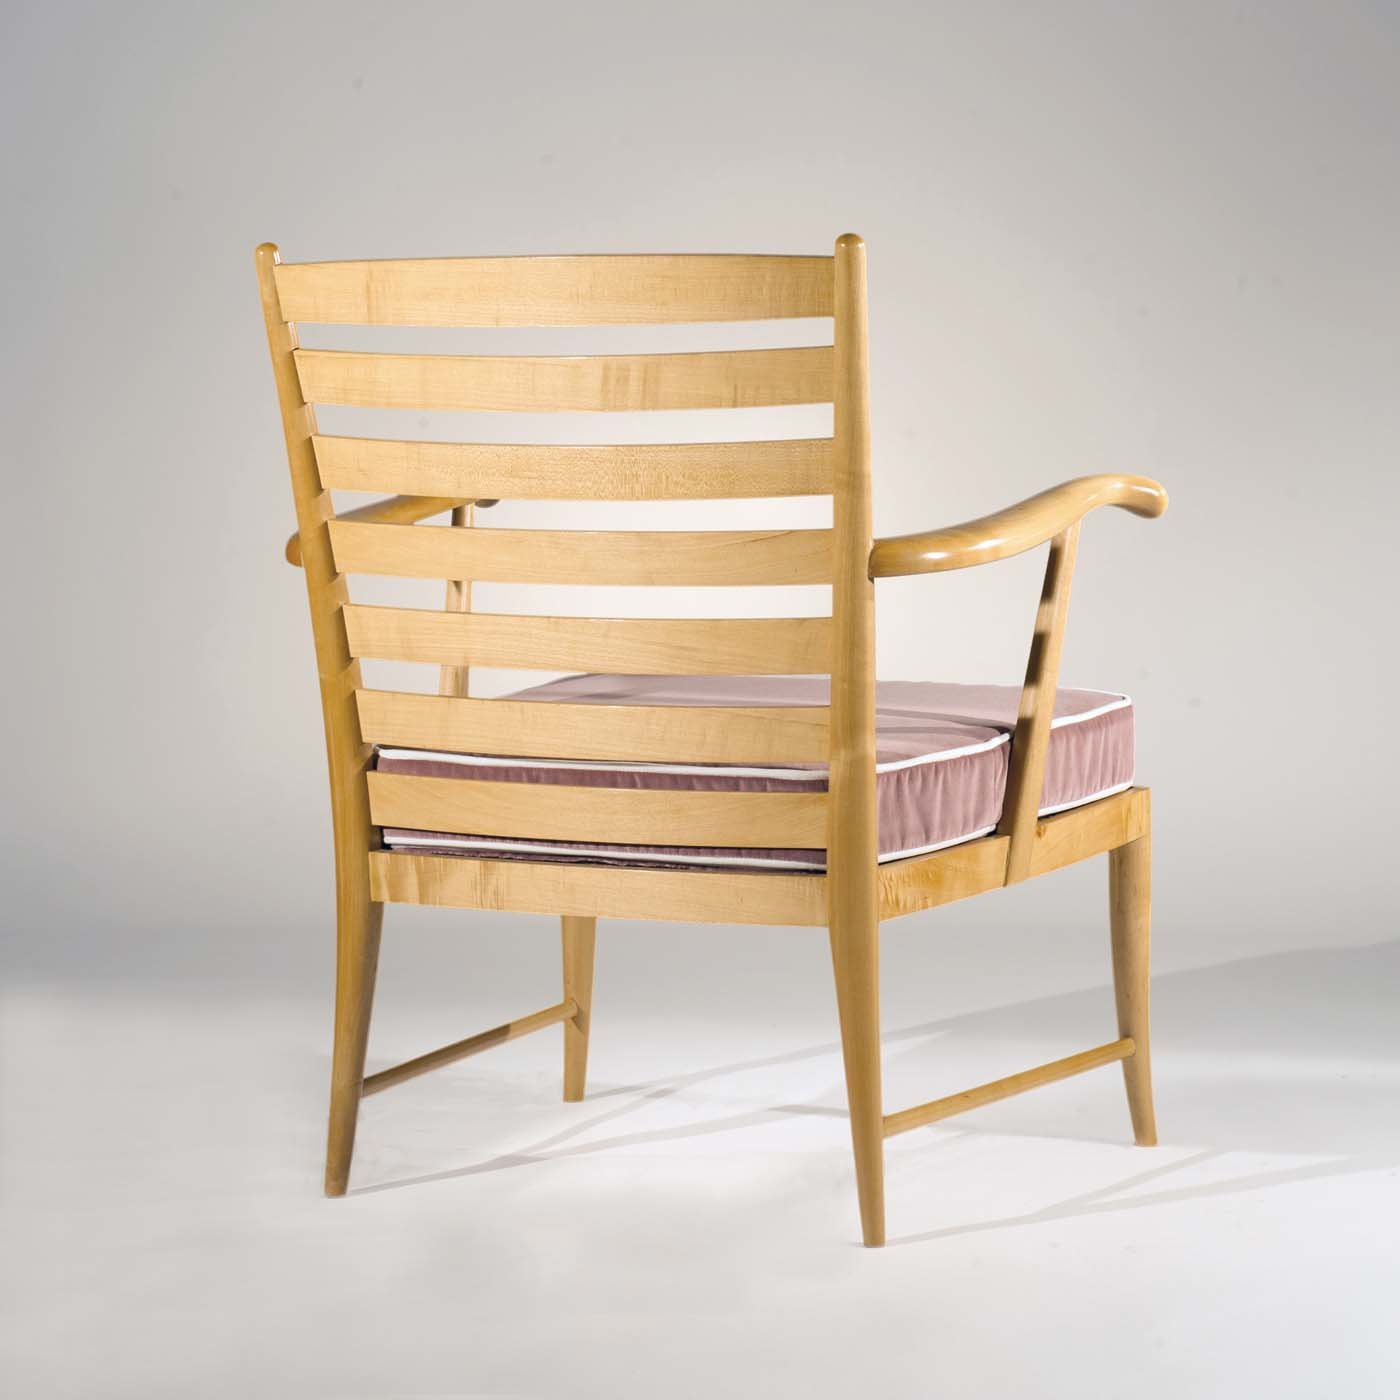 1955 Pink Tiny Armchair by Paolo Buffa in Maple Wood - Alternative view 2